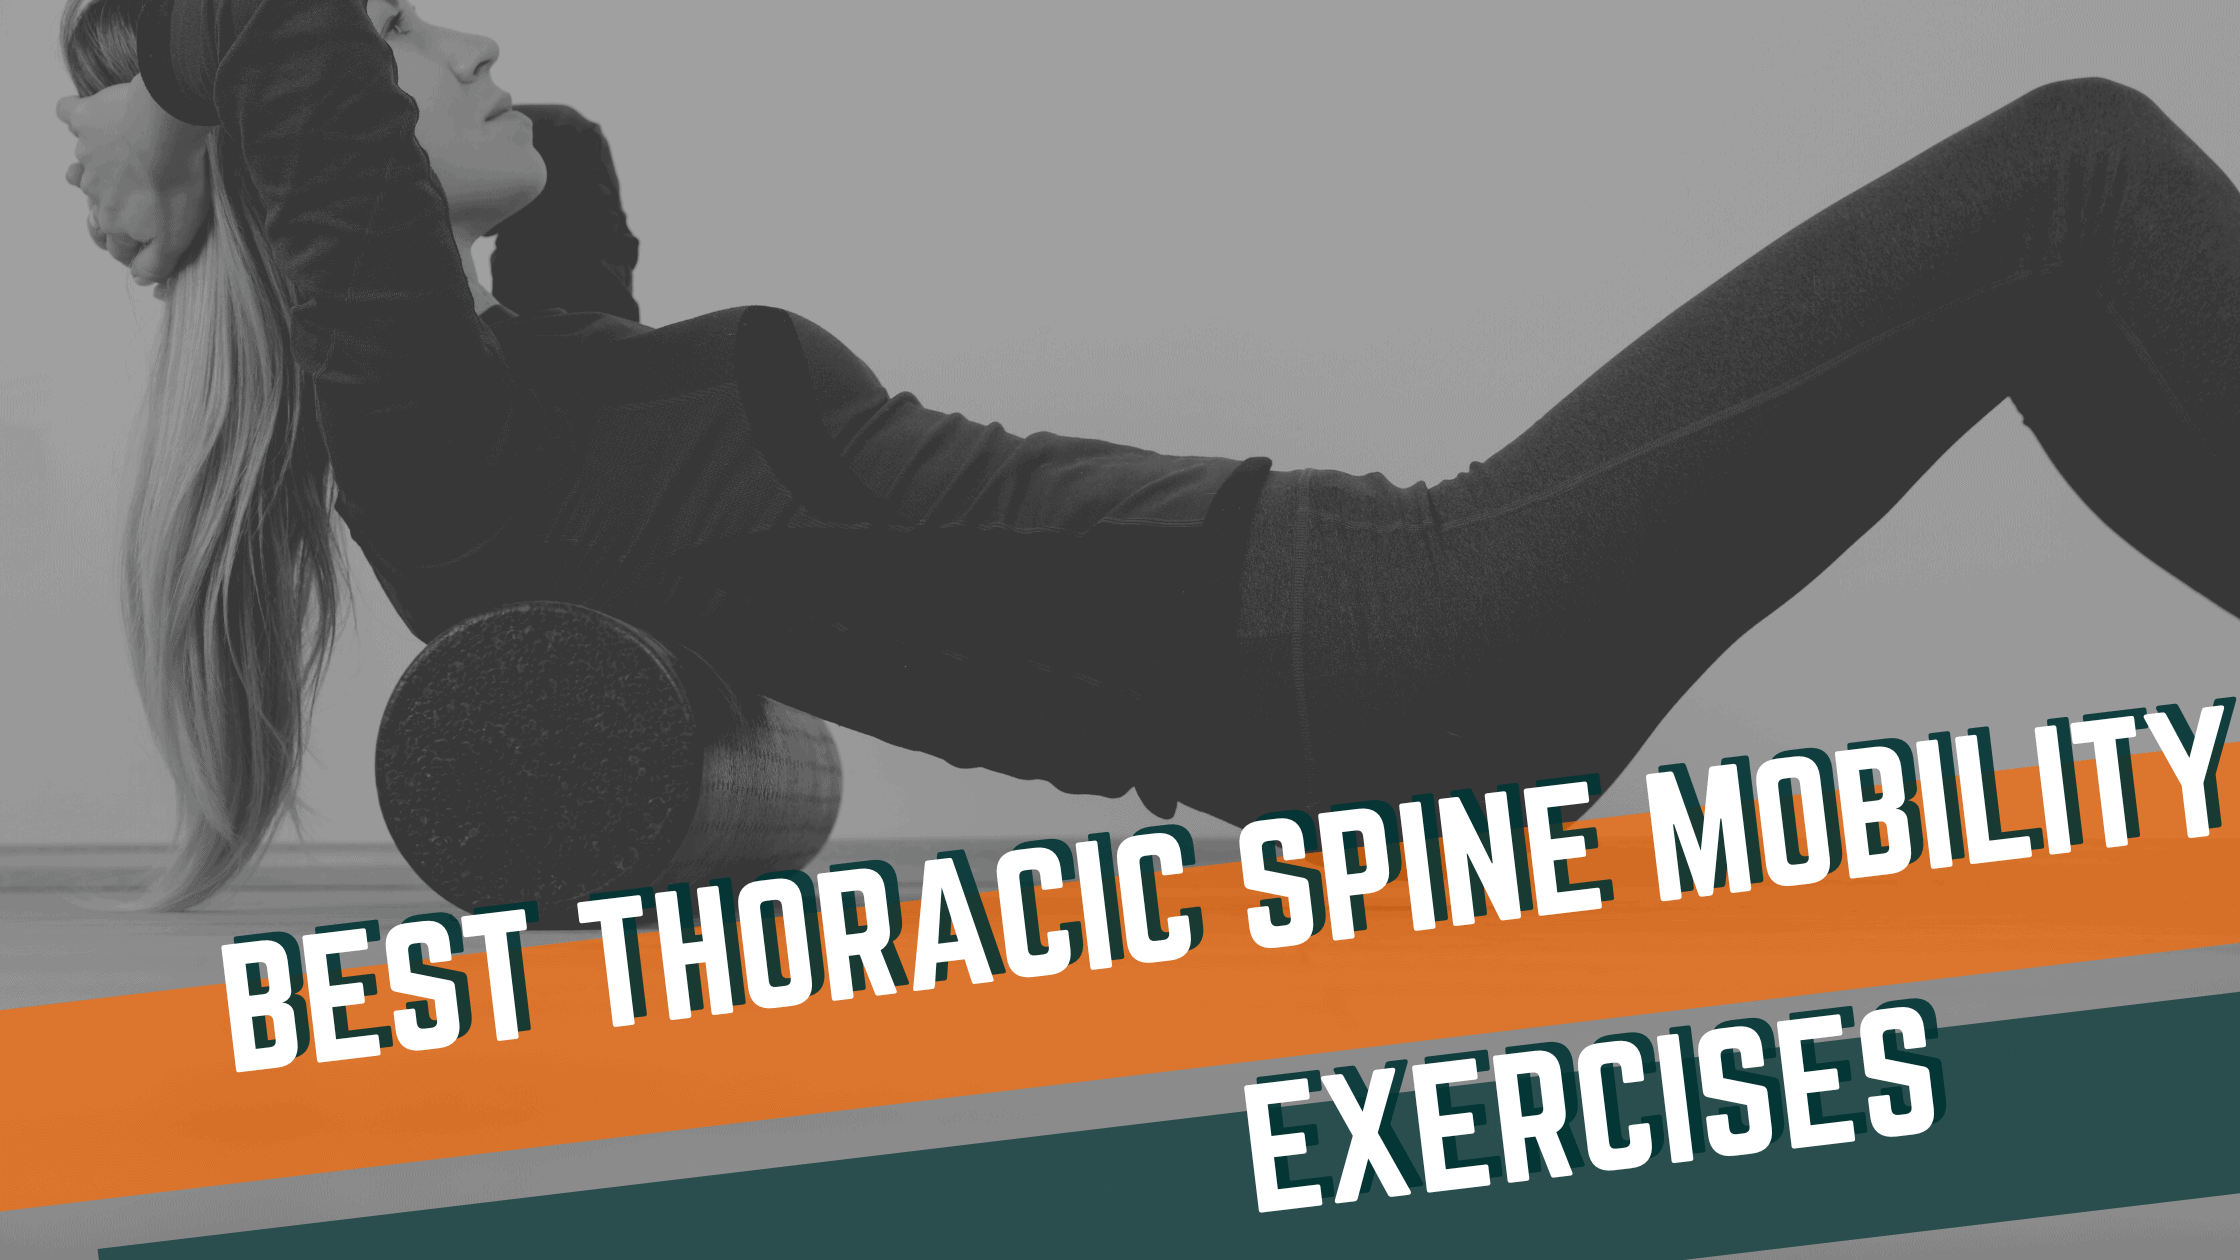 Featured image for “Best Thoracic Spine Mobility Exercises”